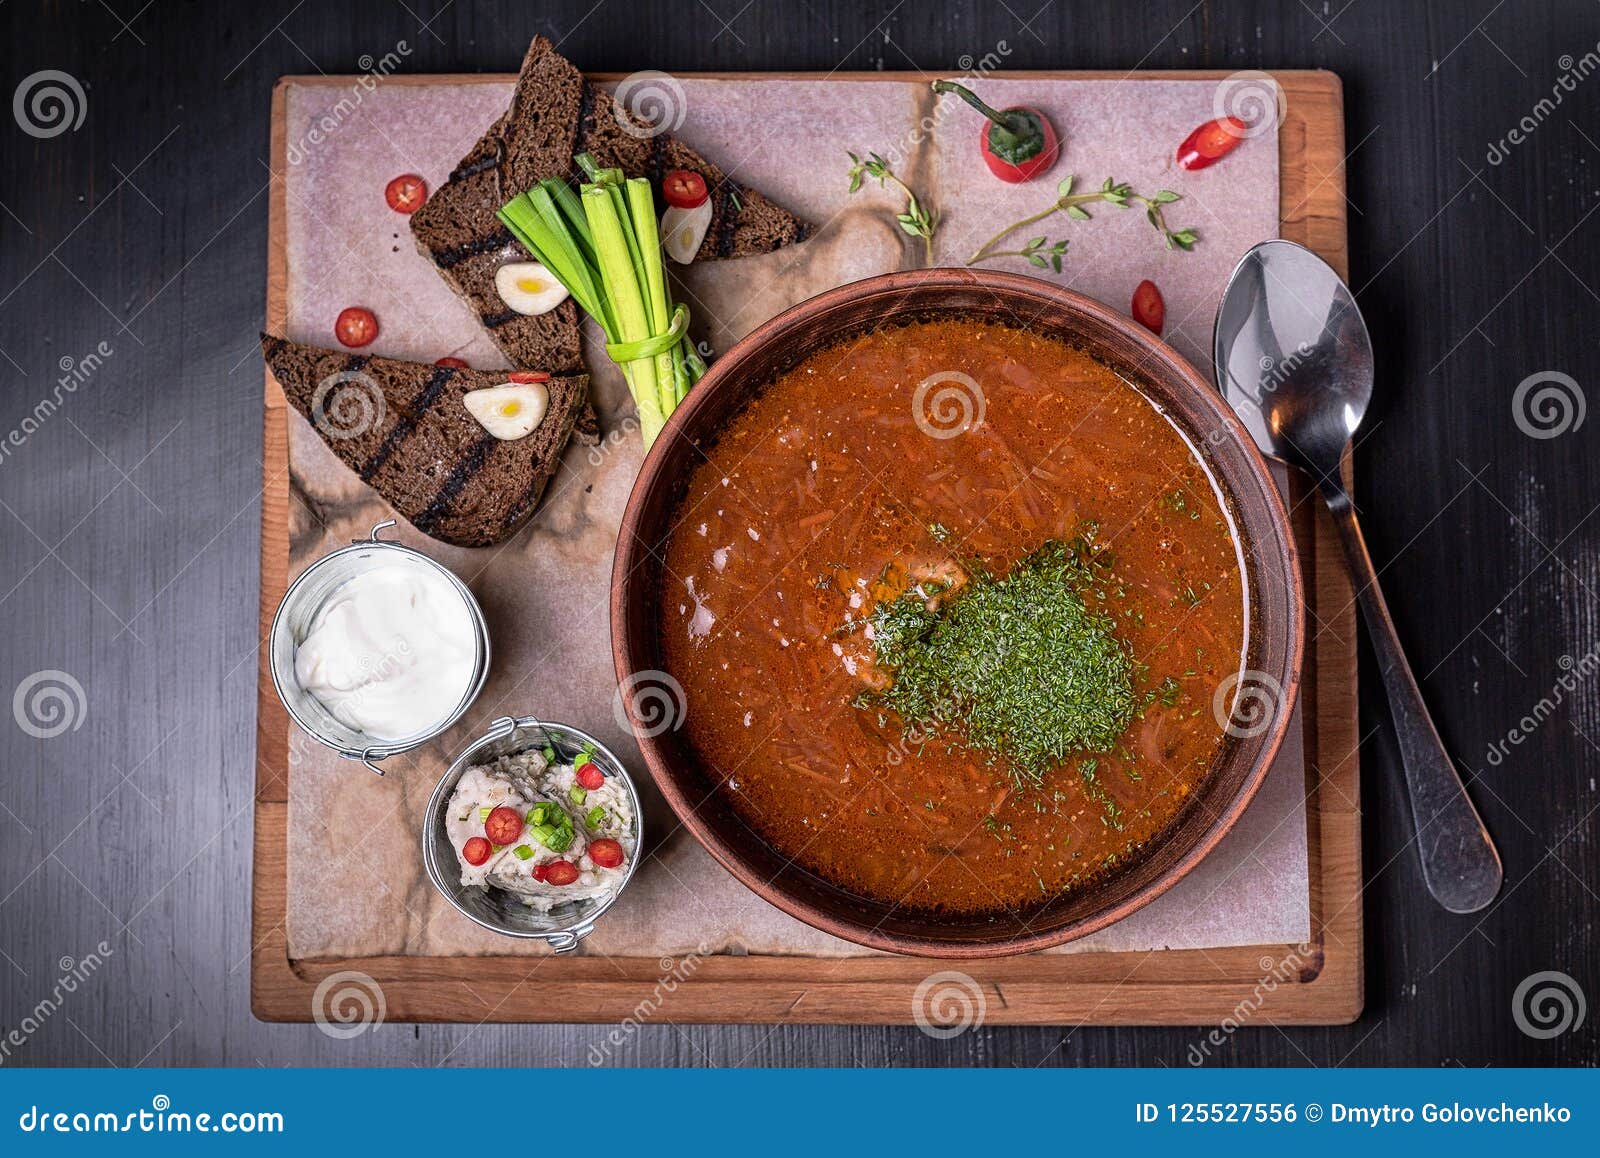 Borscht in a Brown Porcelain Dish with Bread Stock Photo - Image of ...